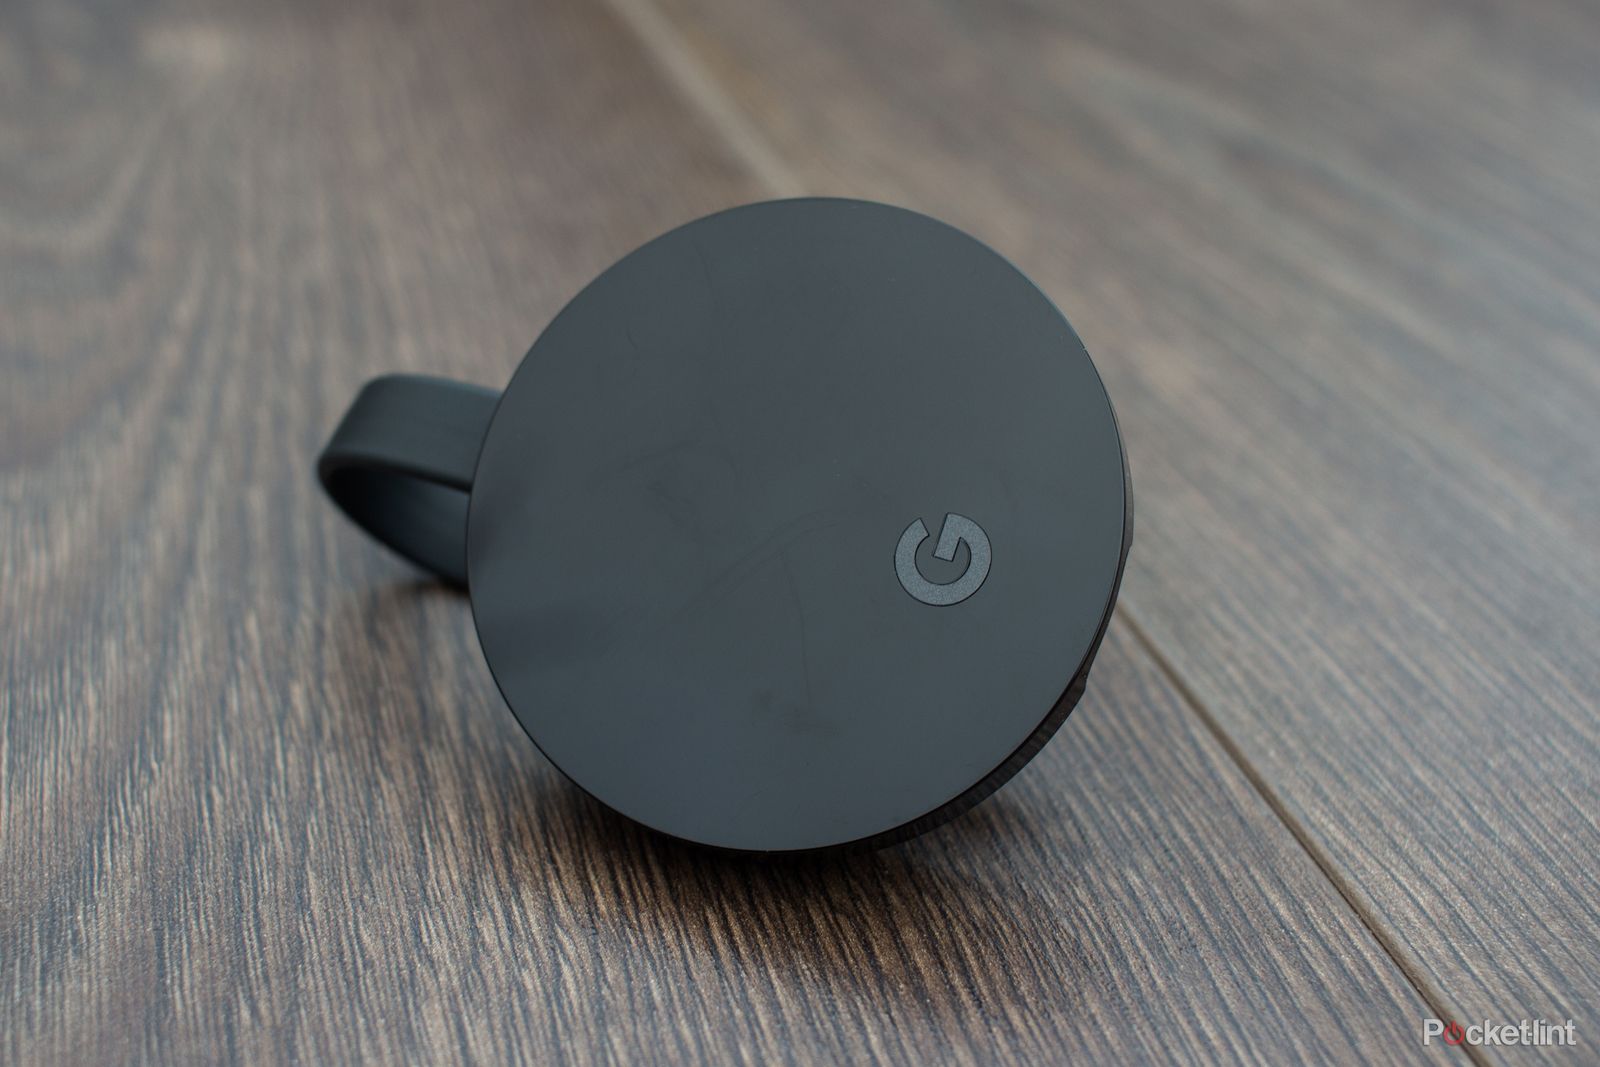 A new Google Chromecast Ultra with remote could be right around the corner image 1